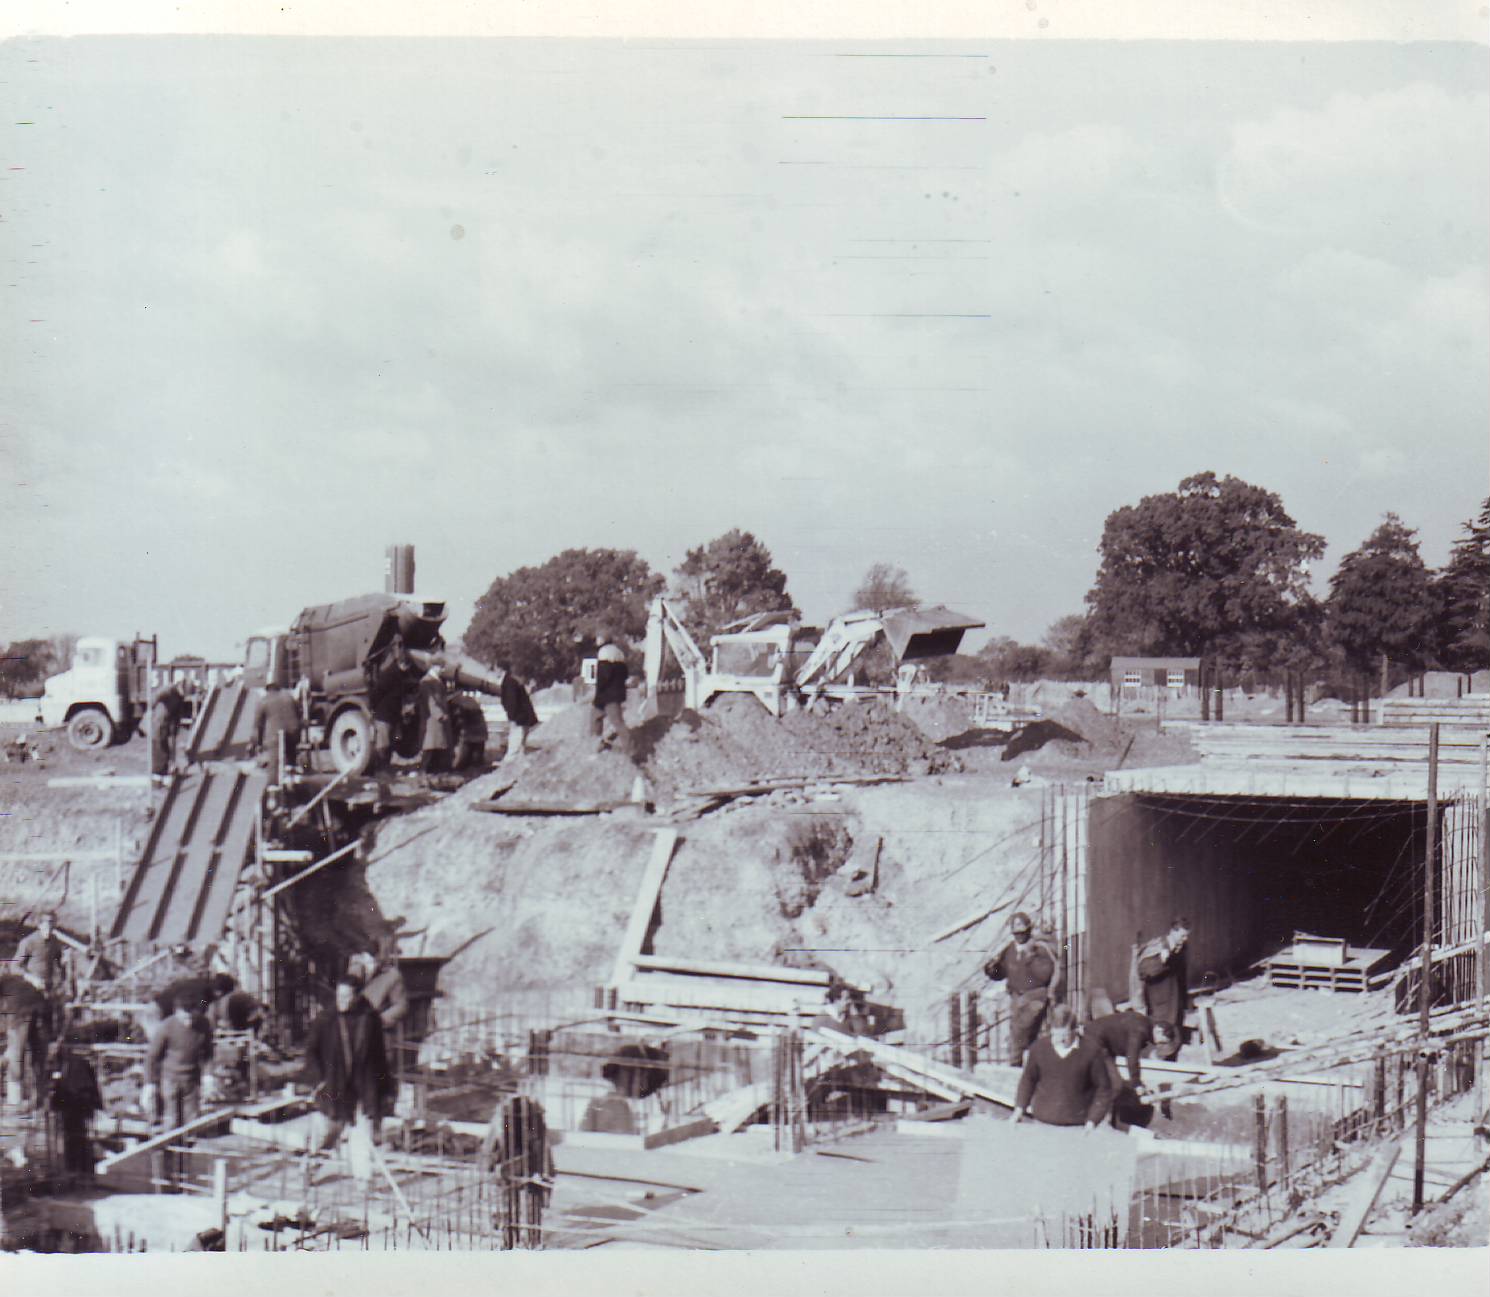 Construction of one of the subways, Oct 1964